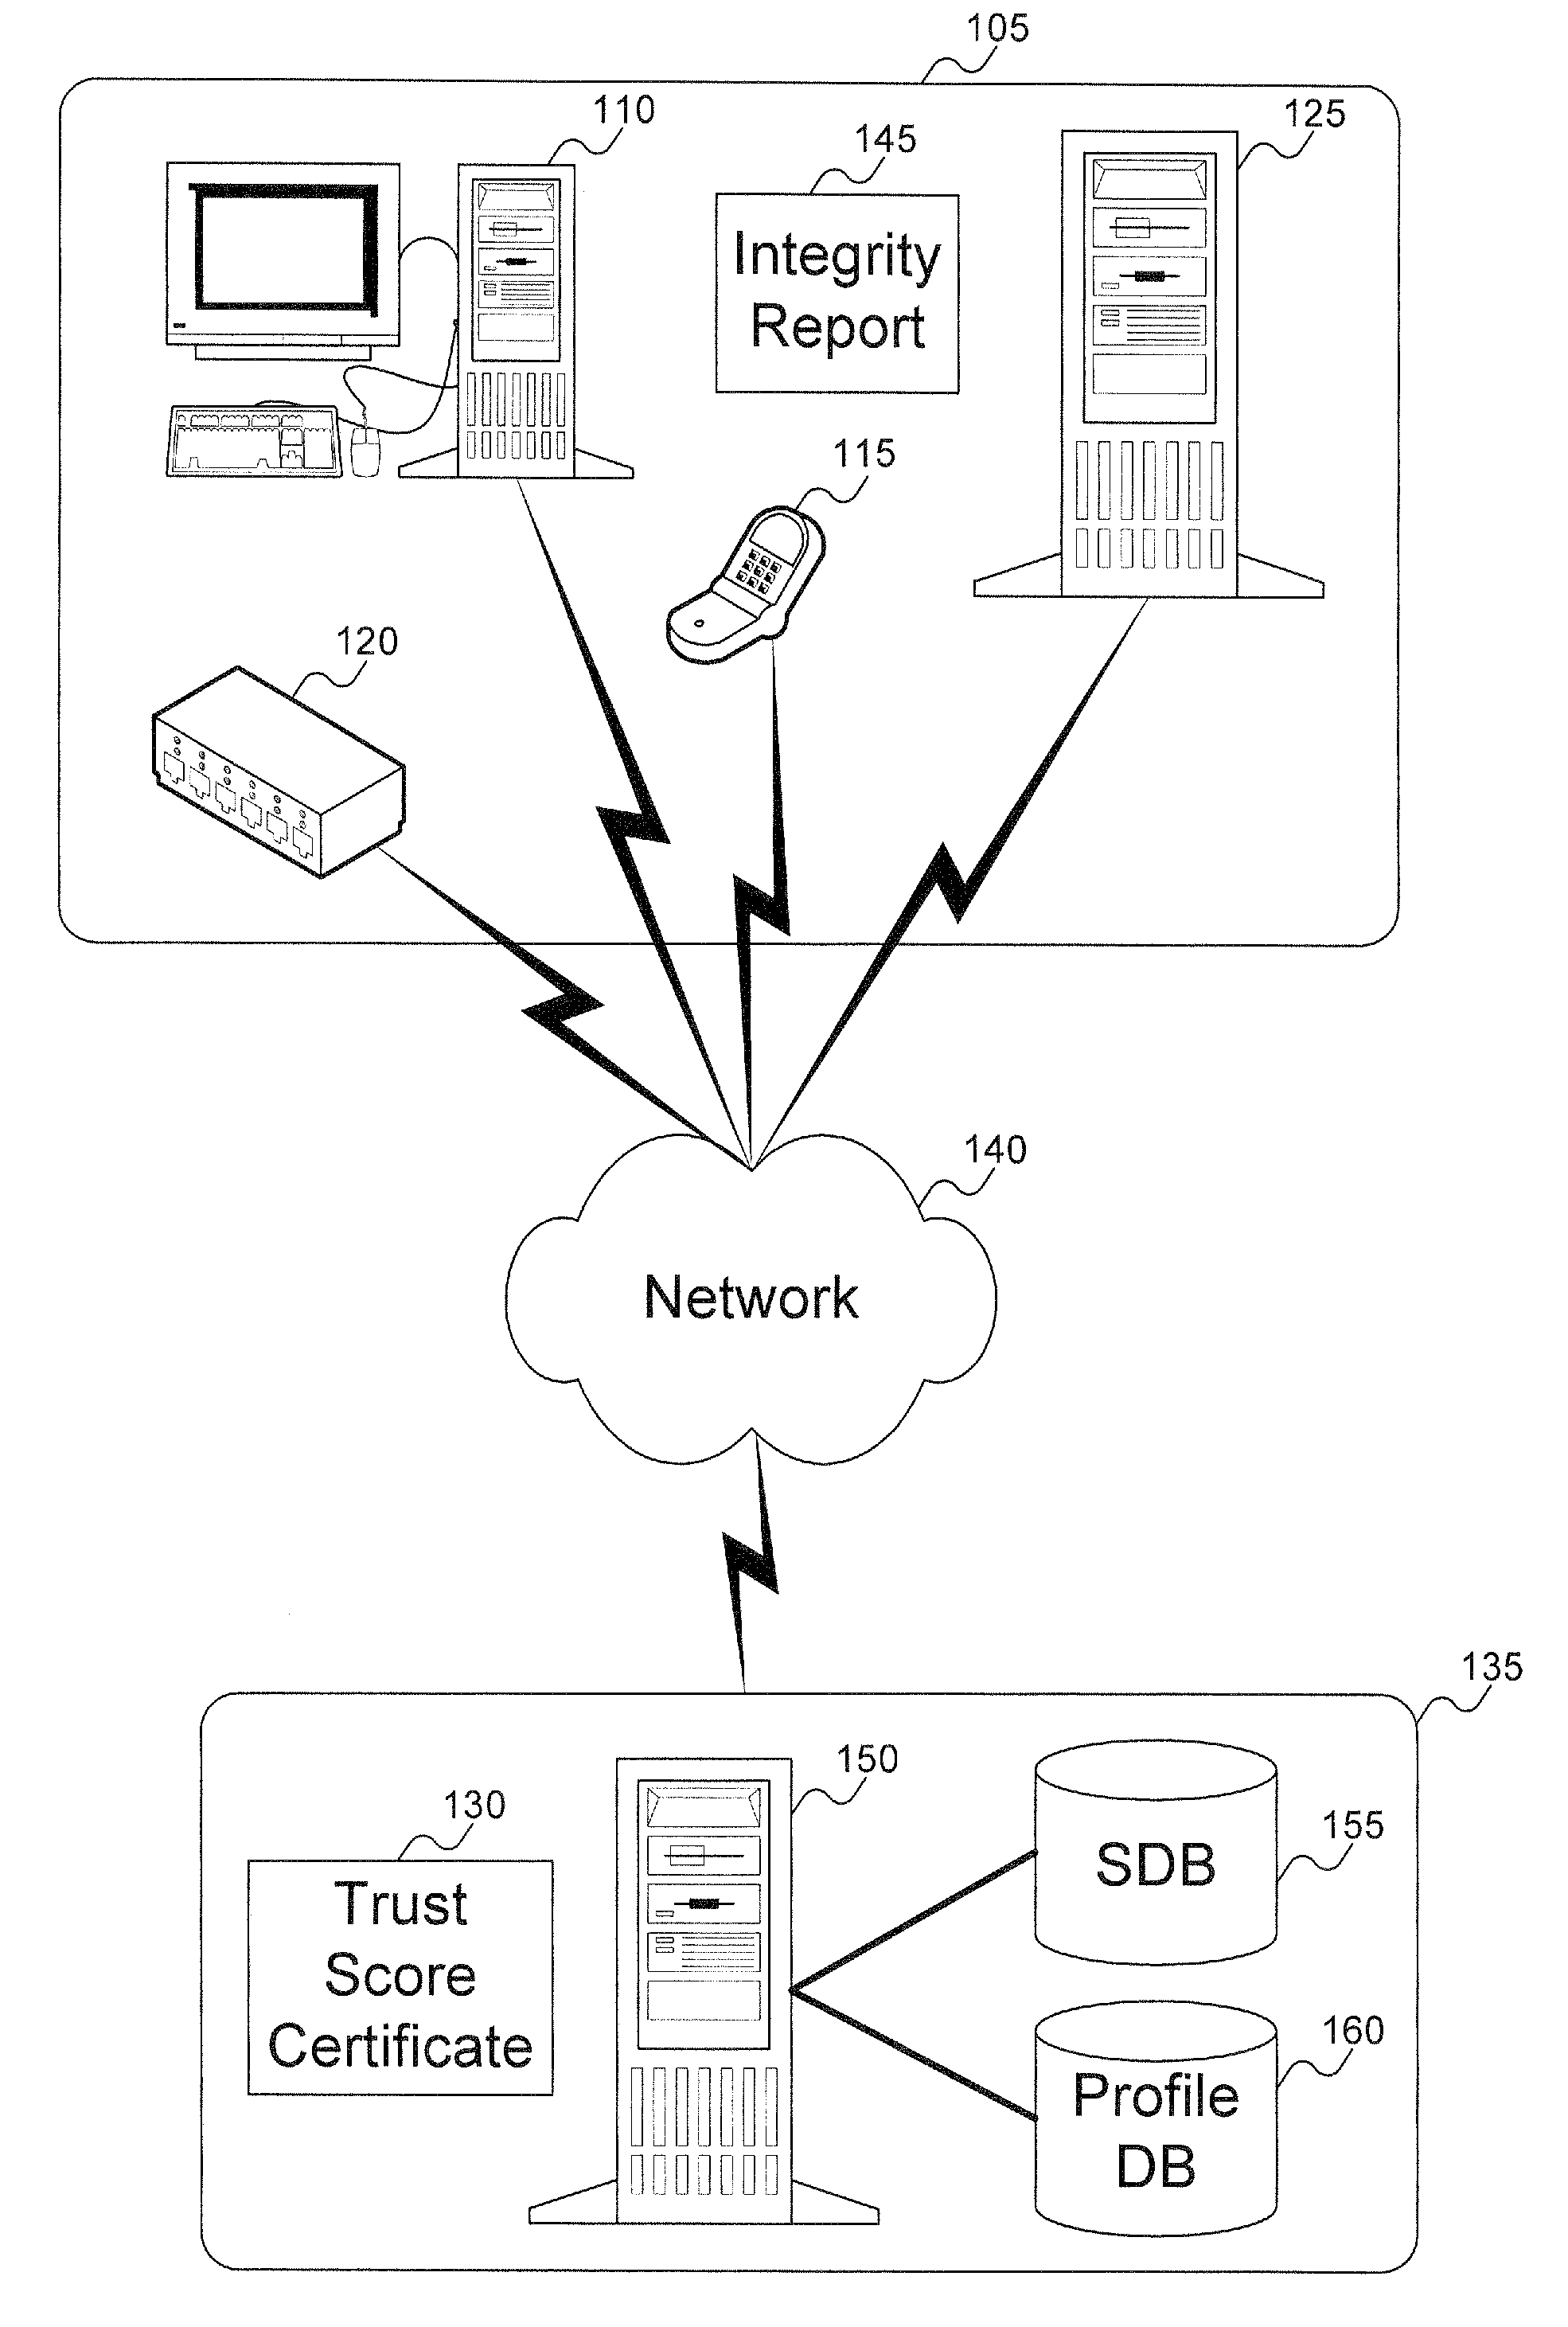 Method and system to issue trust score certificates for networked devices using a trust scoring service